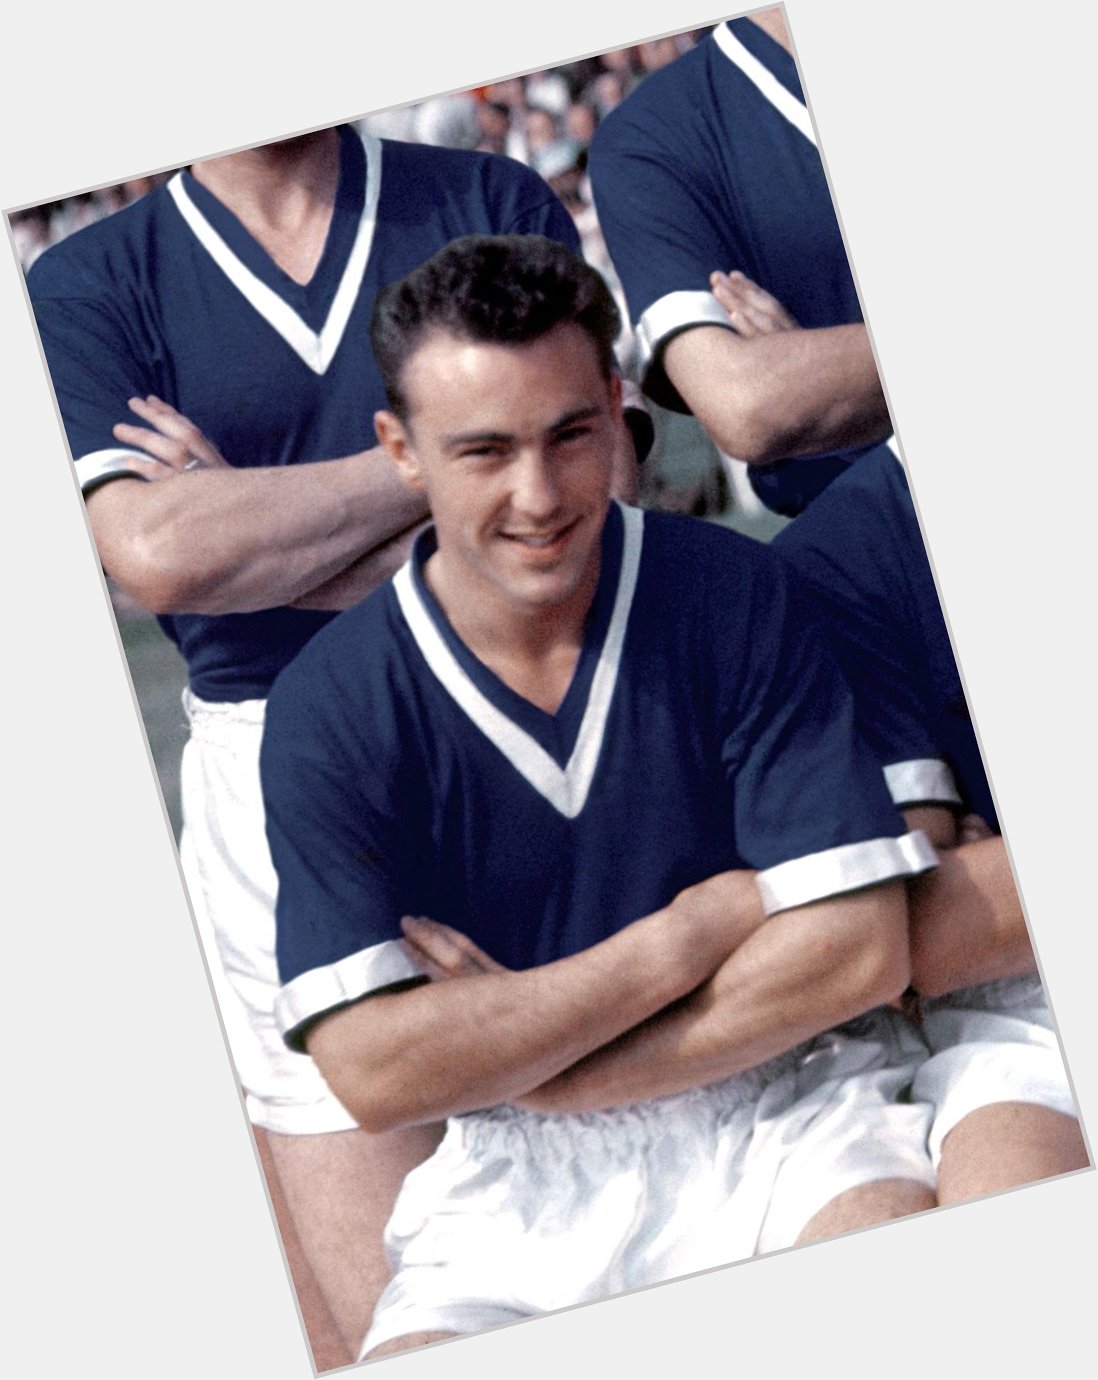 Today we say happy birthday to a key former player, Jimmy Greaves! 